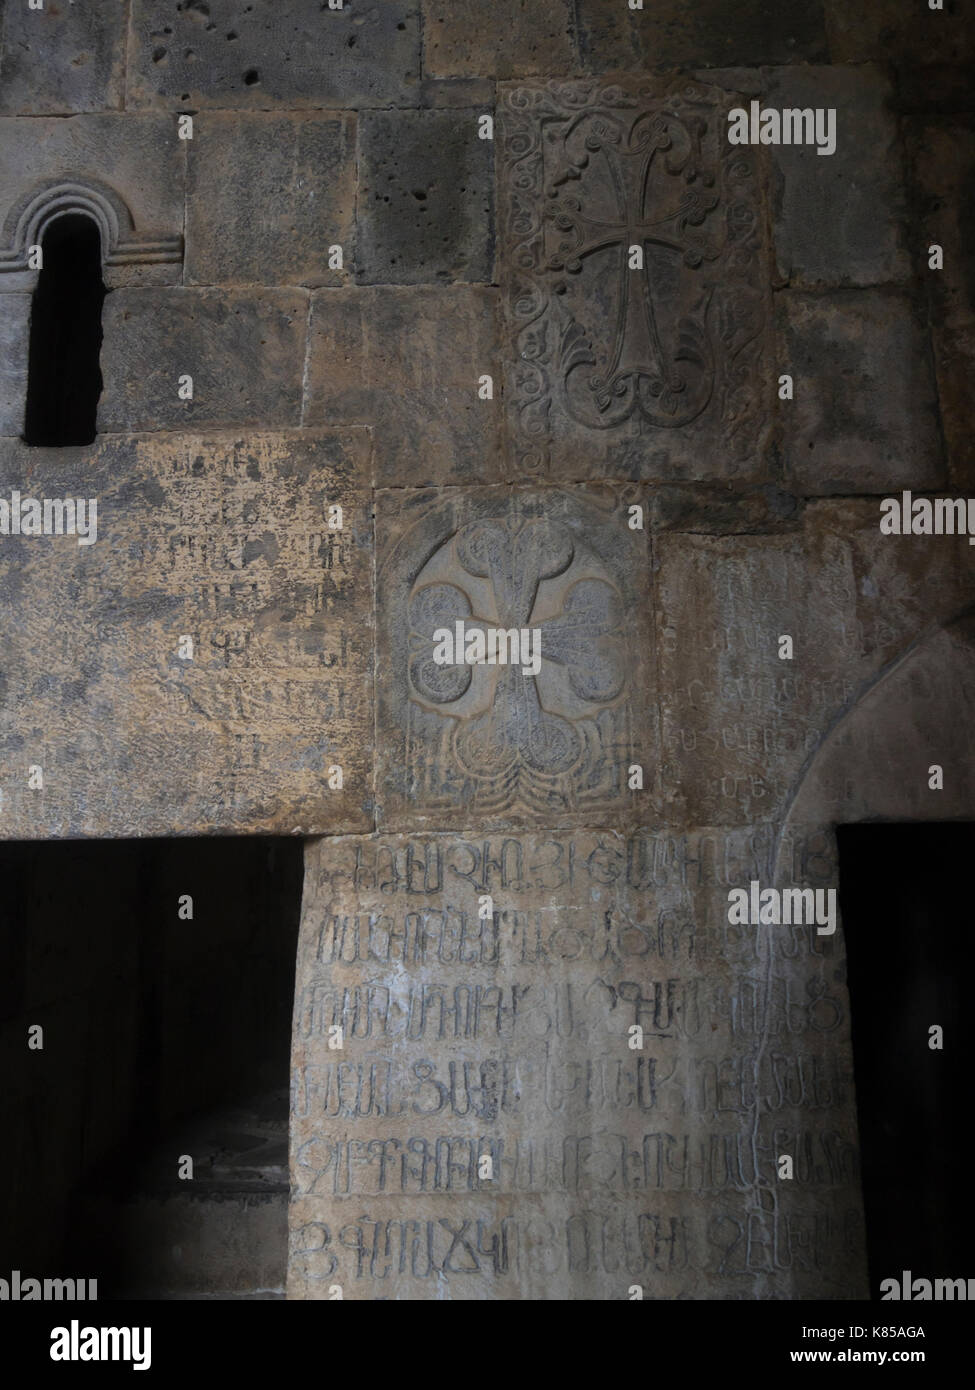 Haghpat Monastery or Haghpatavank in northern Armenia dating back to ca. 976 AD, a Unesco world heritage site, interior carved inscription in Armenian Stock Photo